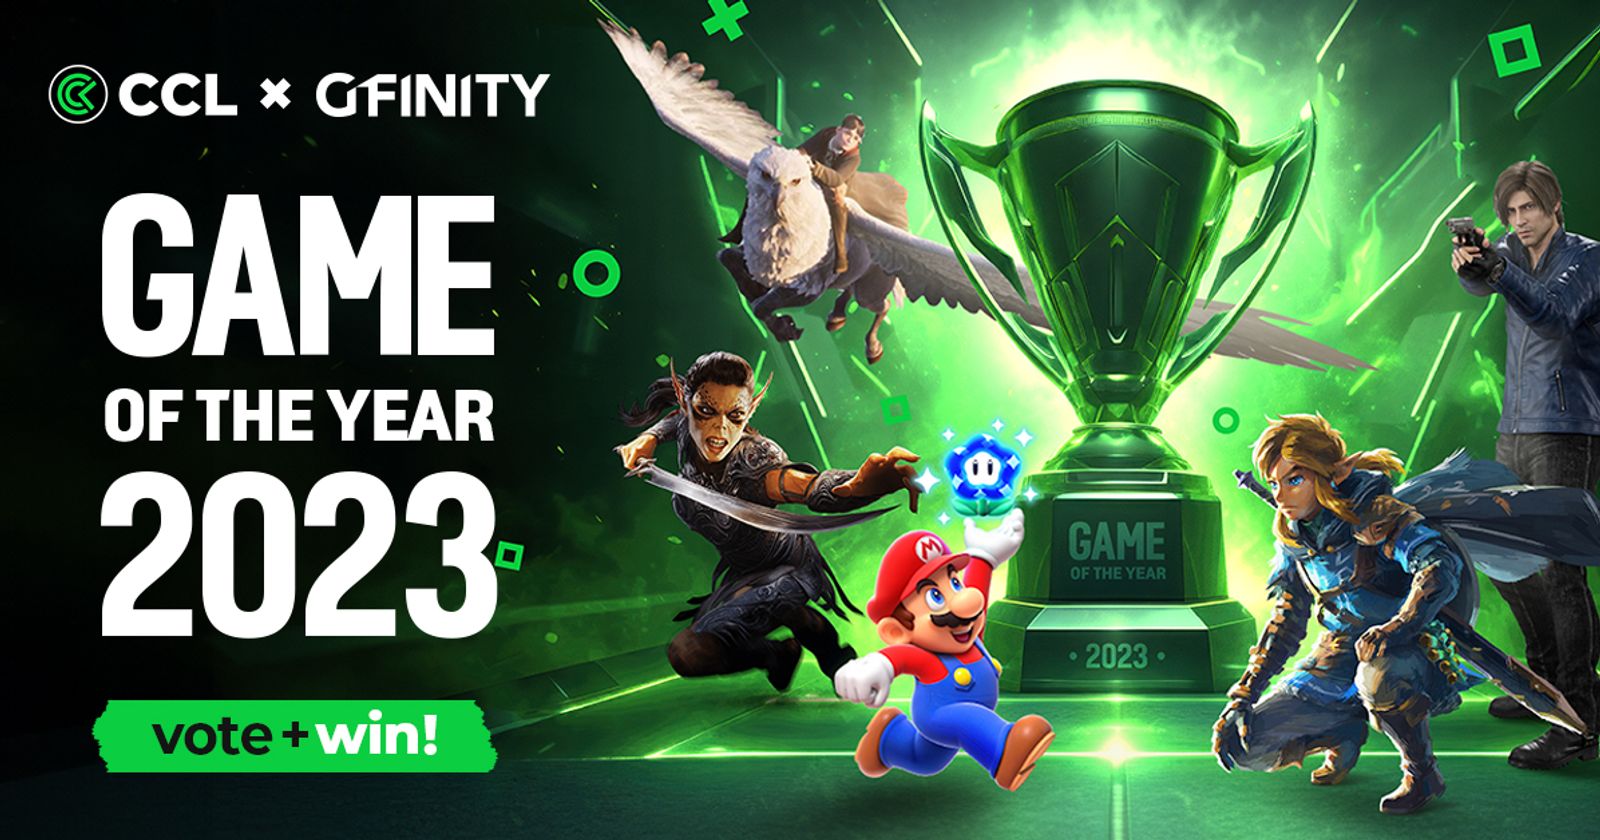 CCL x Gfinity Game Of The Year 2023: Have your say for a chance to win!